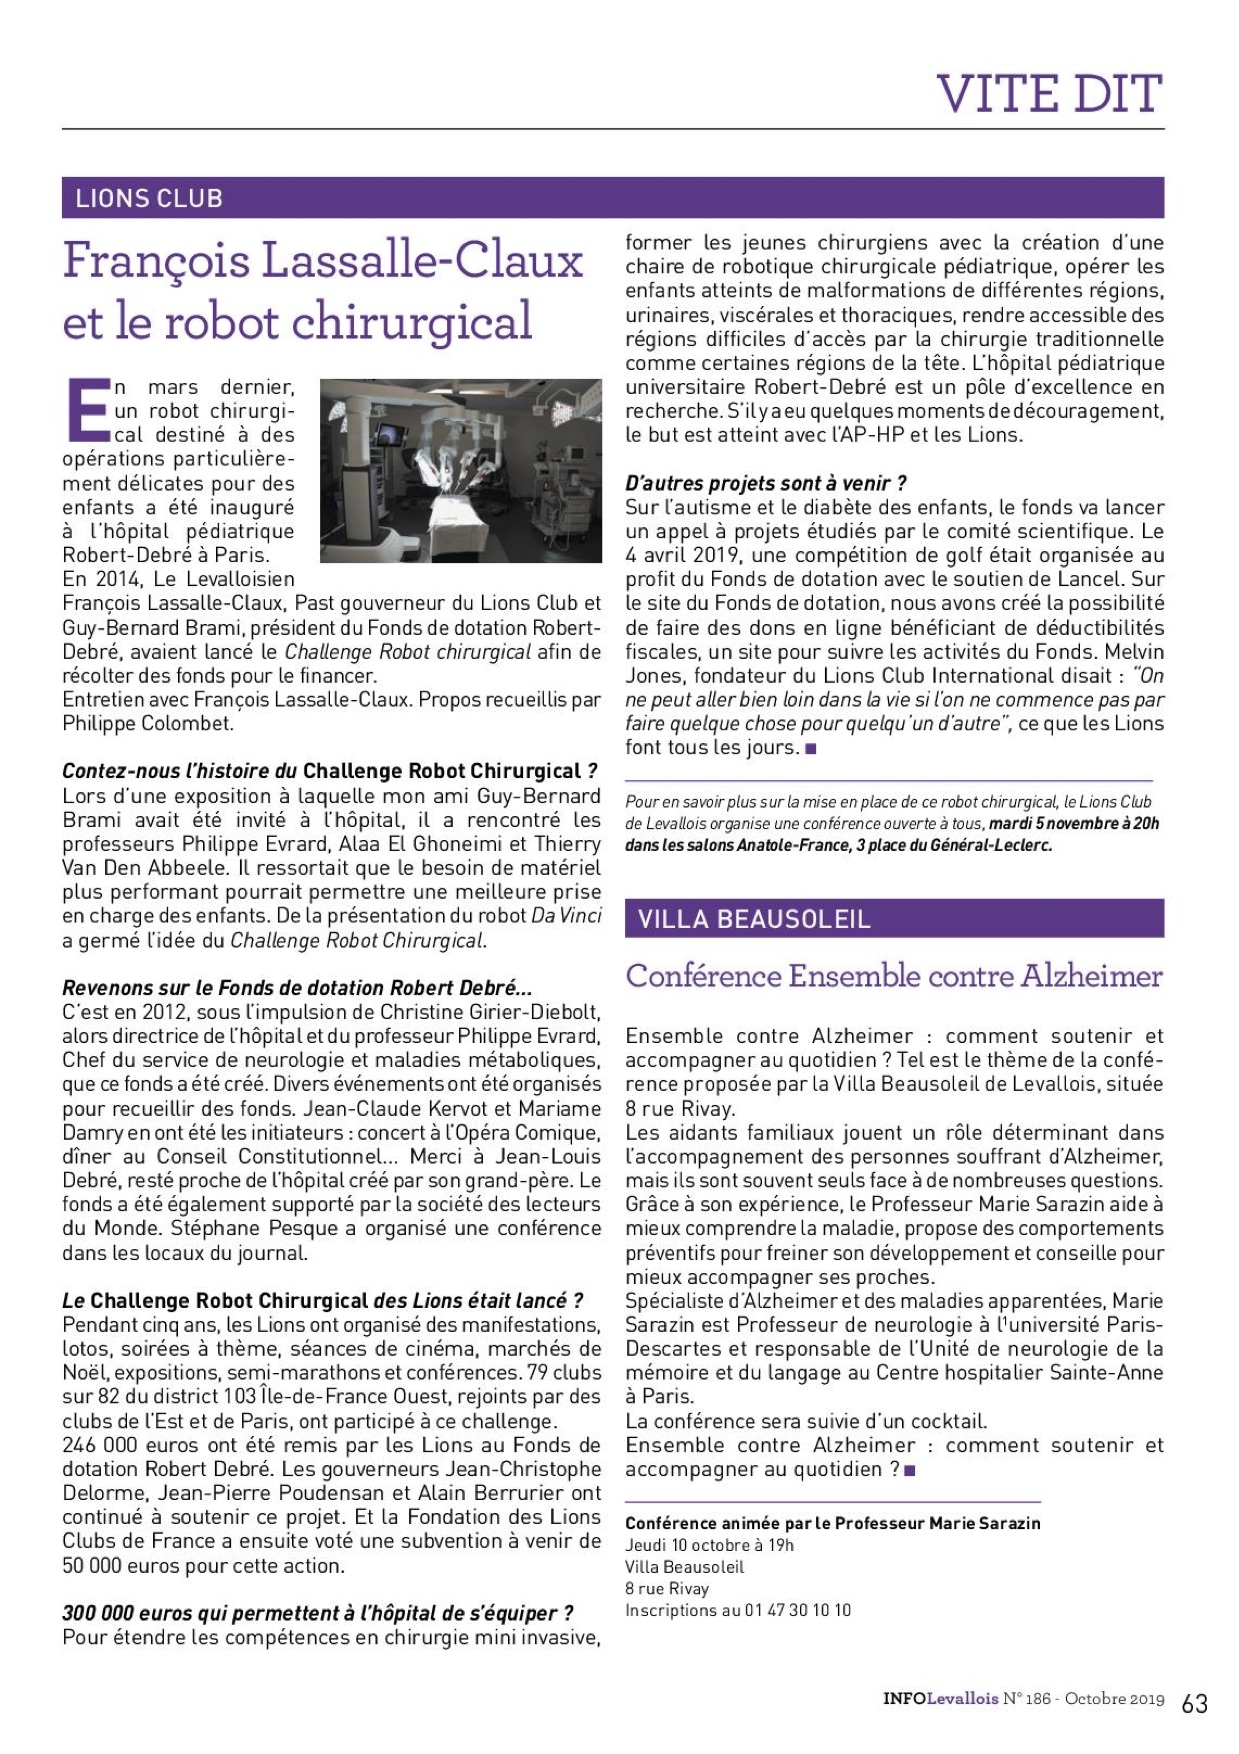 Robot Chirurgical article